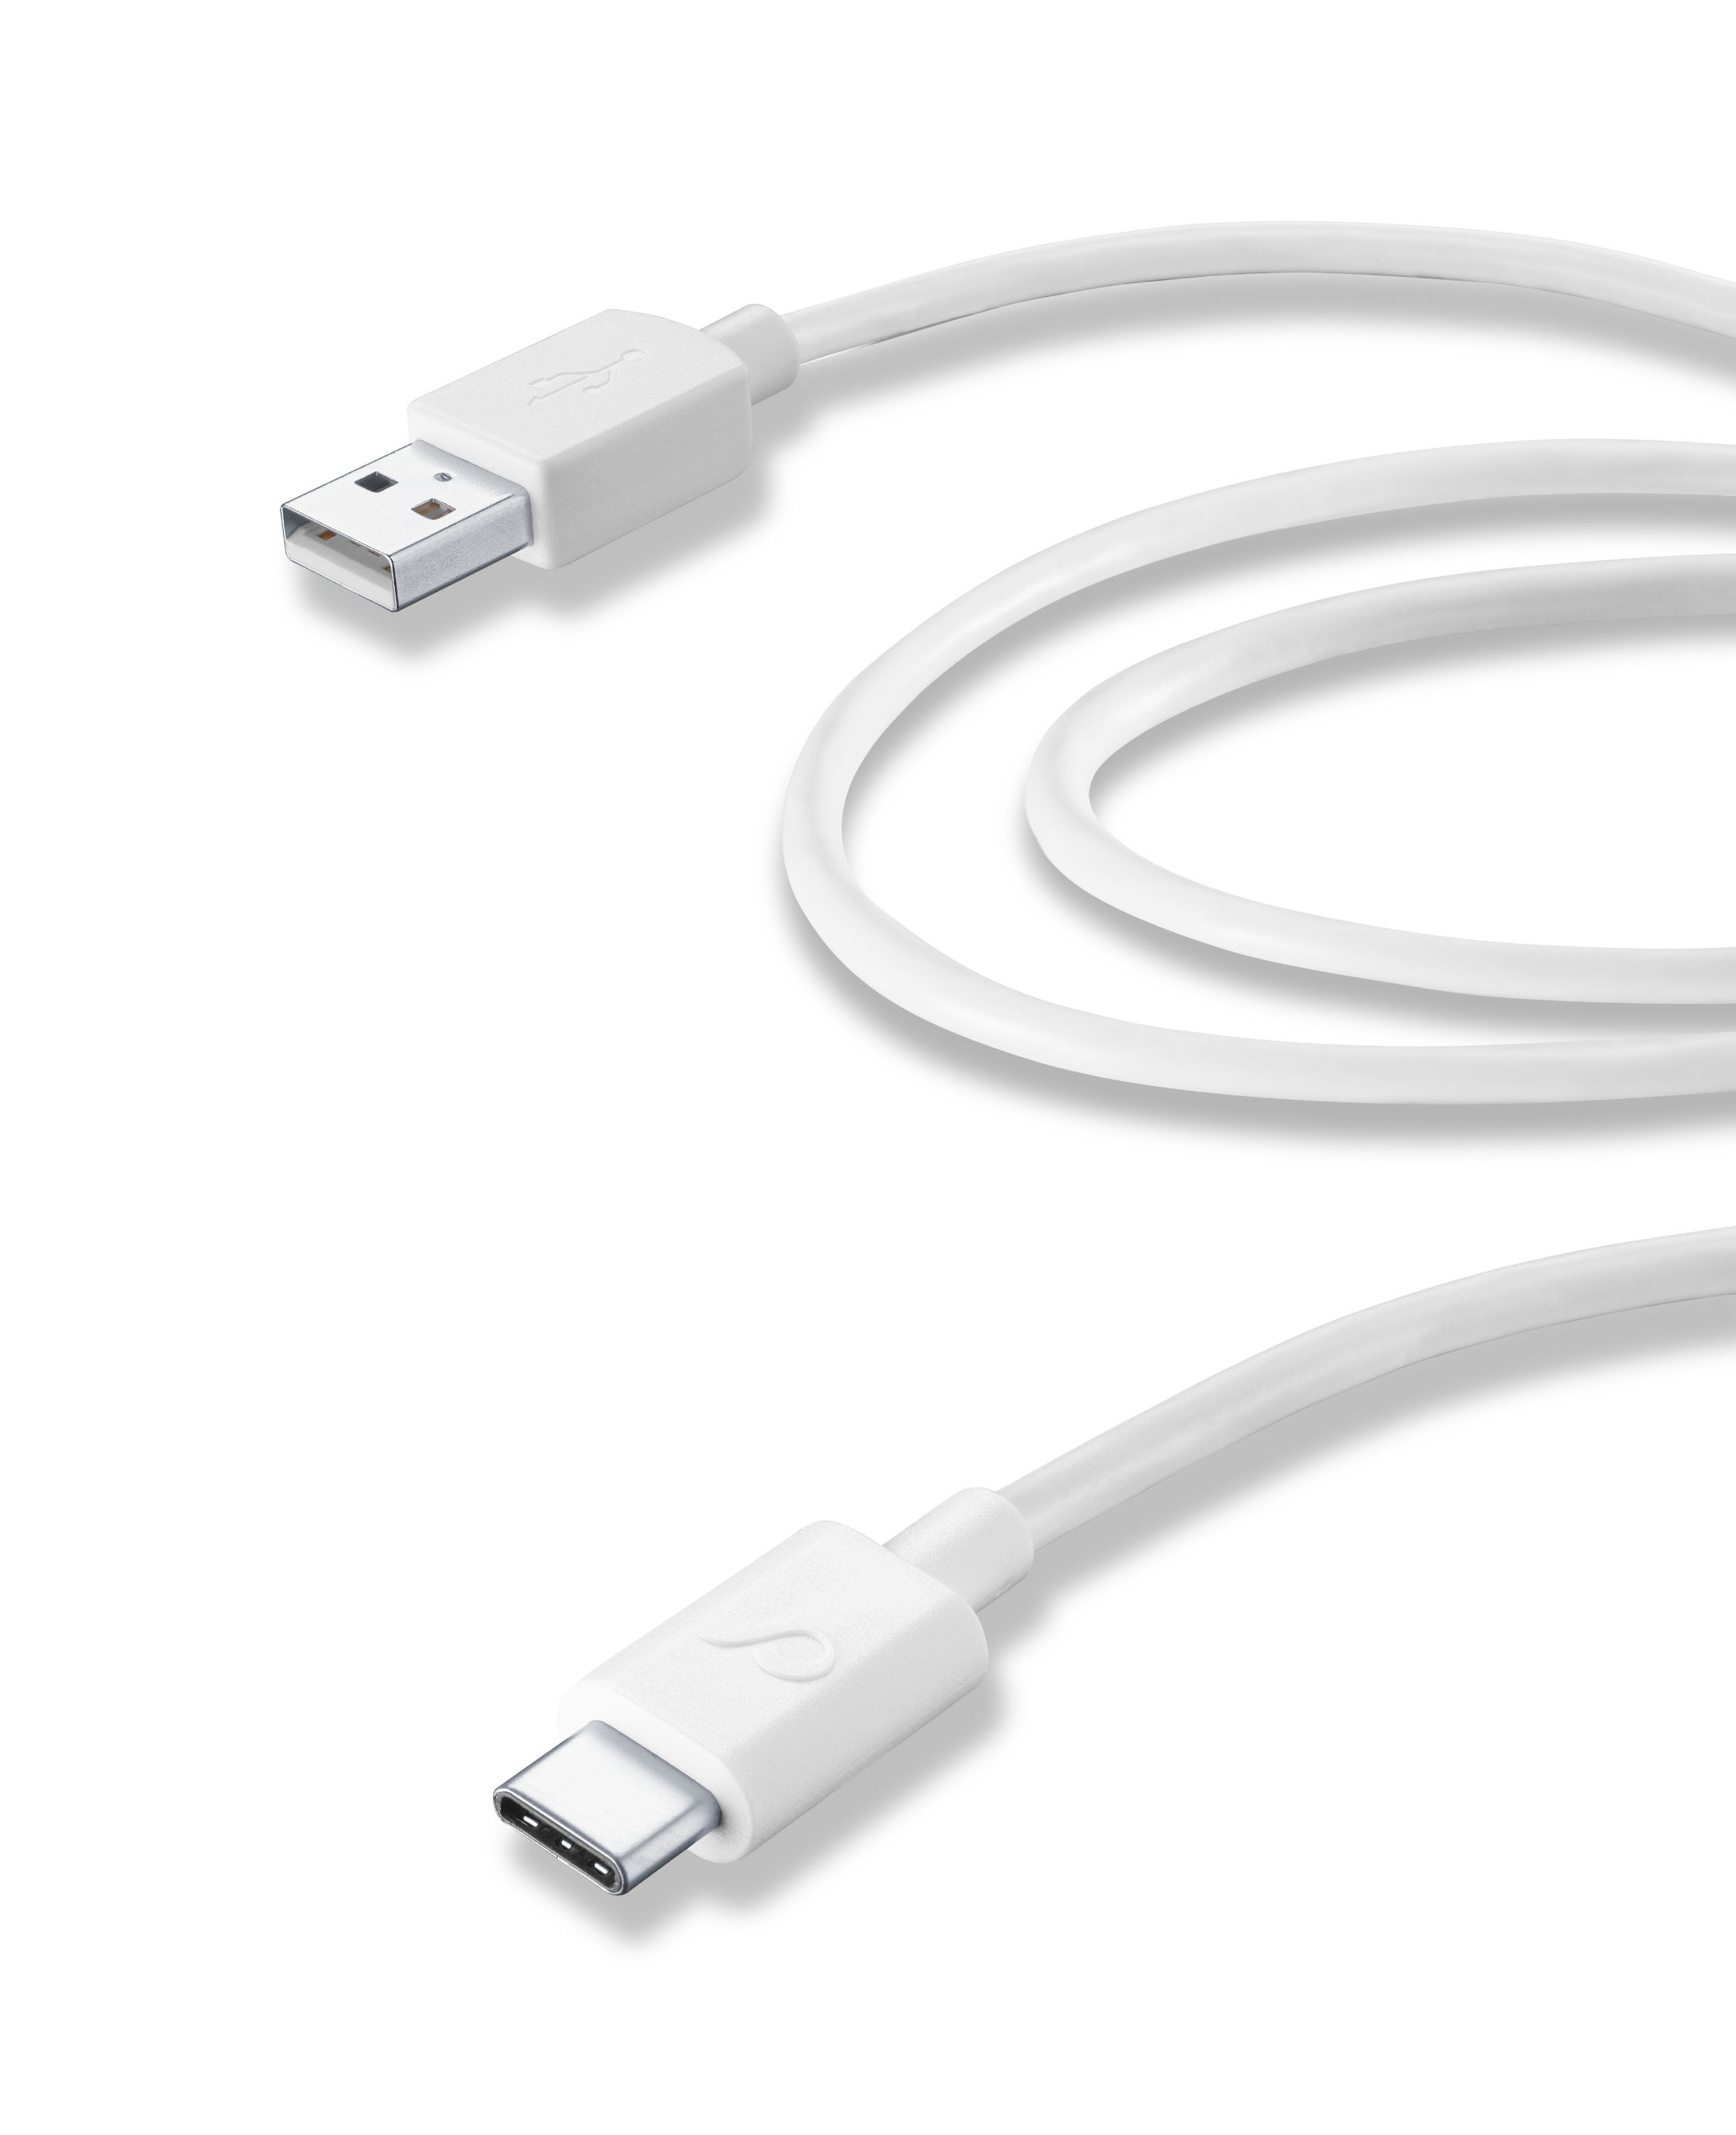 Usb cable, usb-a to usb-c 2m, white